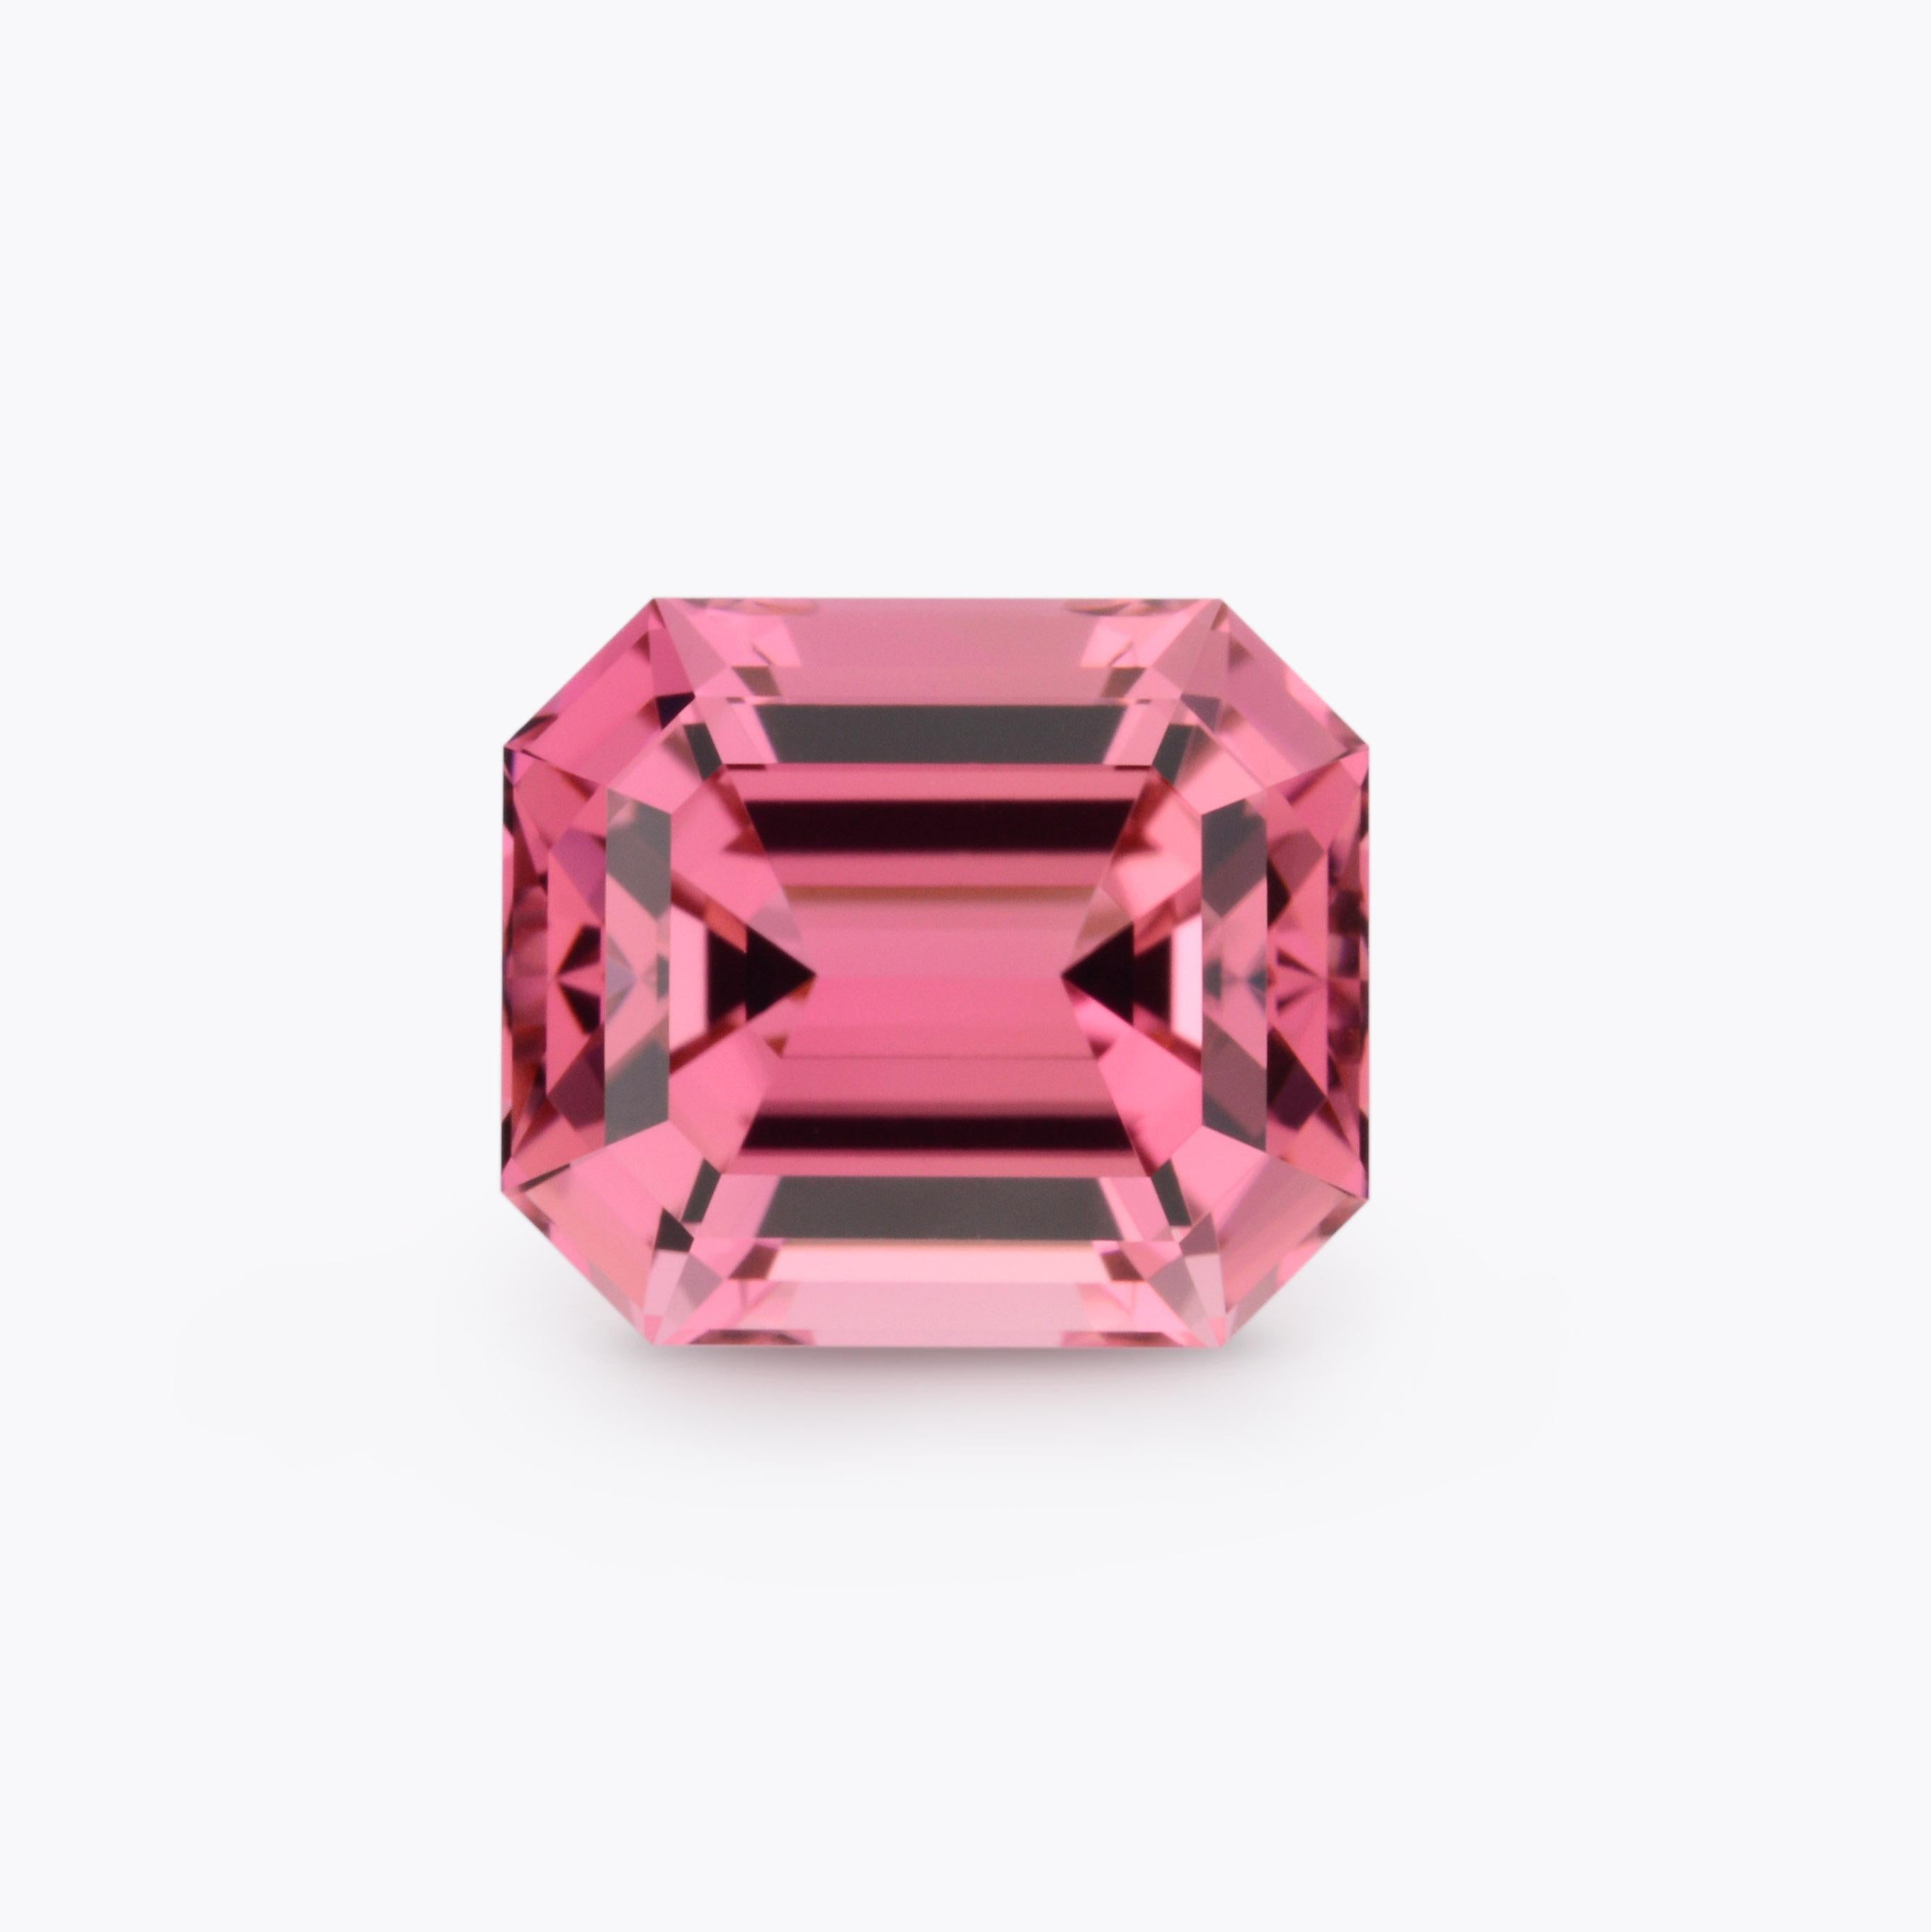 Splendid 4.15 carat Pink Tourmaline Emerald-Cut loose gemstone, offered unmounted to a very special person.
Dimensions: 9.8 x 9.8 x 6.5 mm.
Returns are accepted and paid by us within 7 days of delivery.
We offer supreme custom jewelry work upon